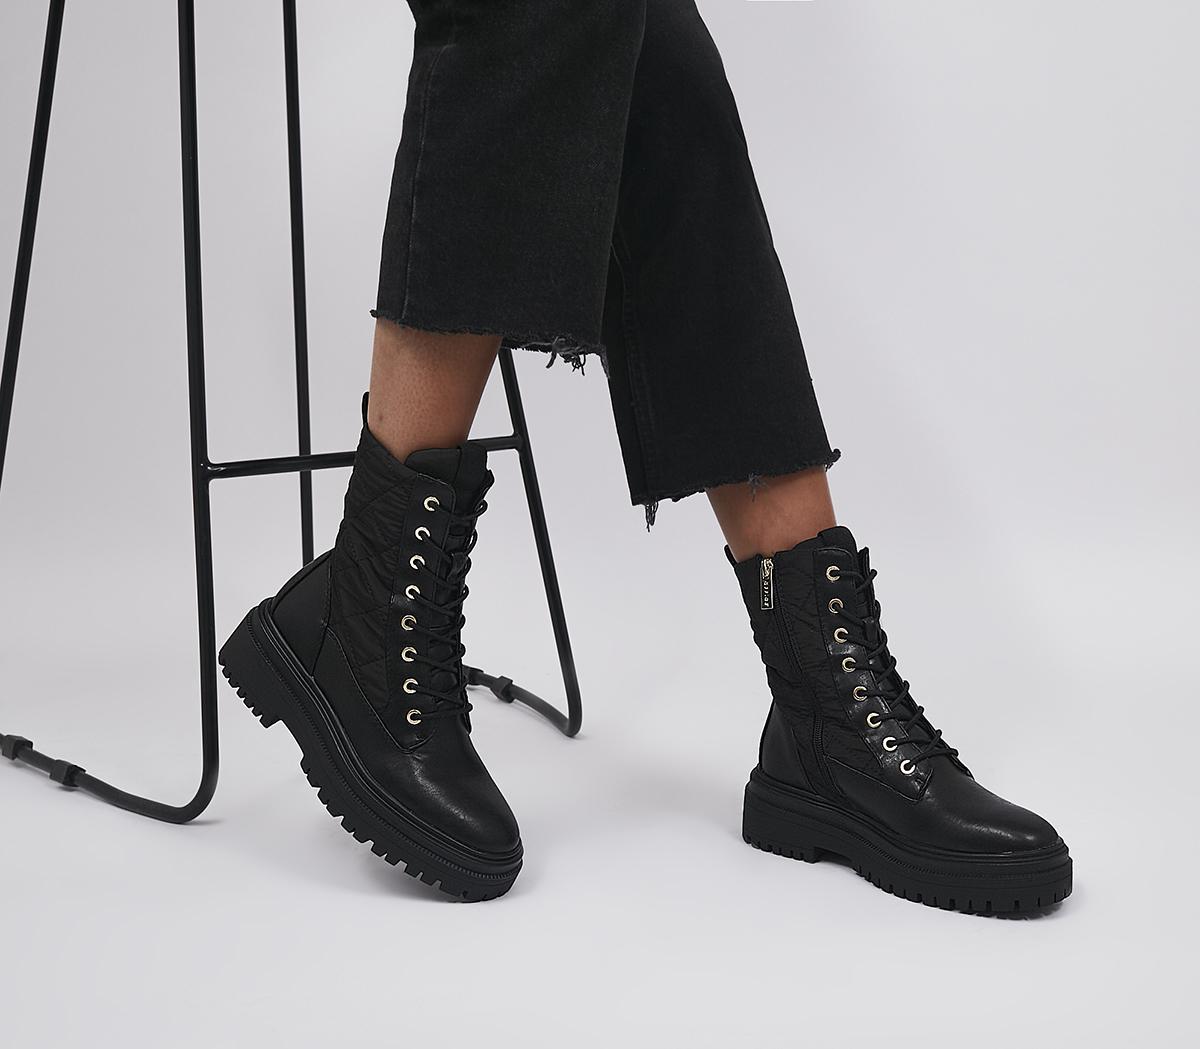 The lace-up boots we're loving this winter